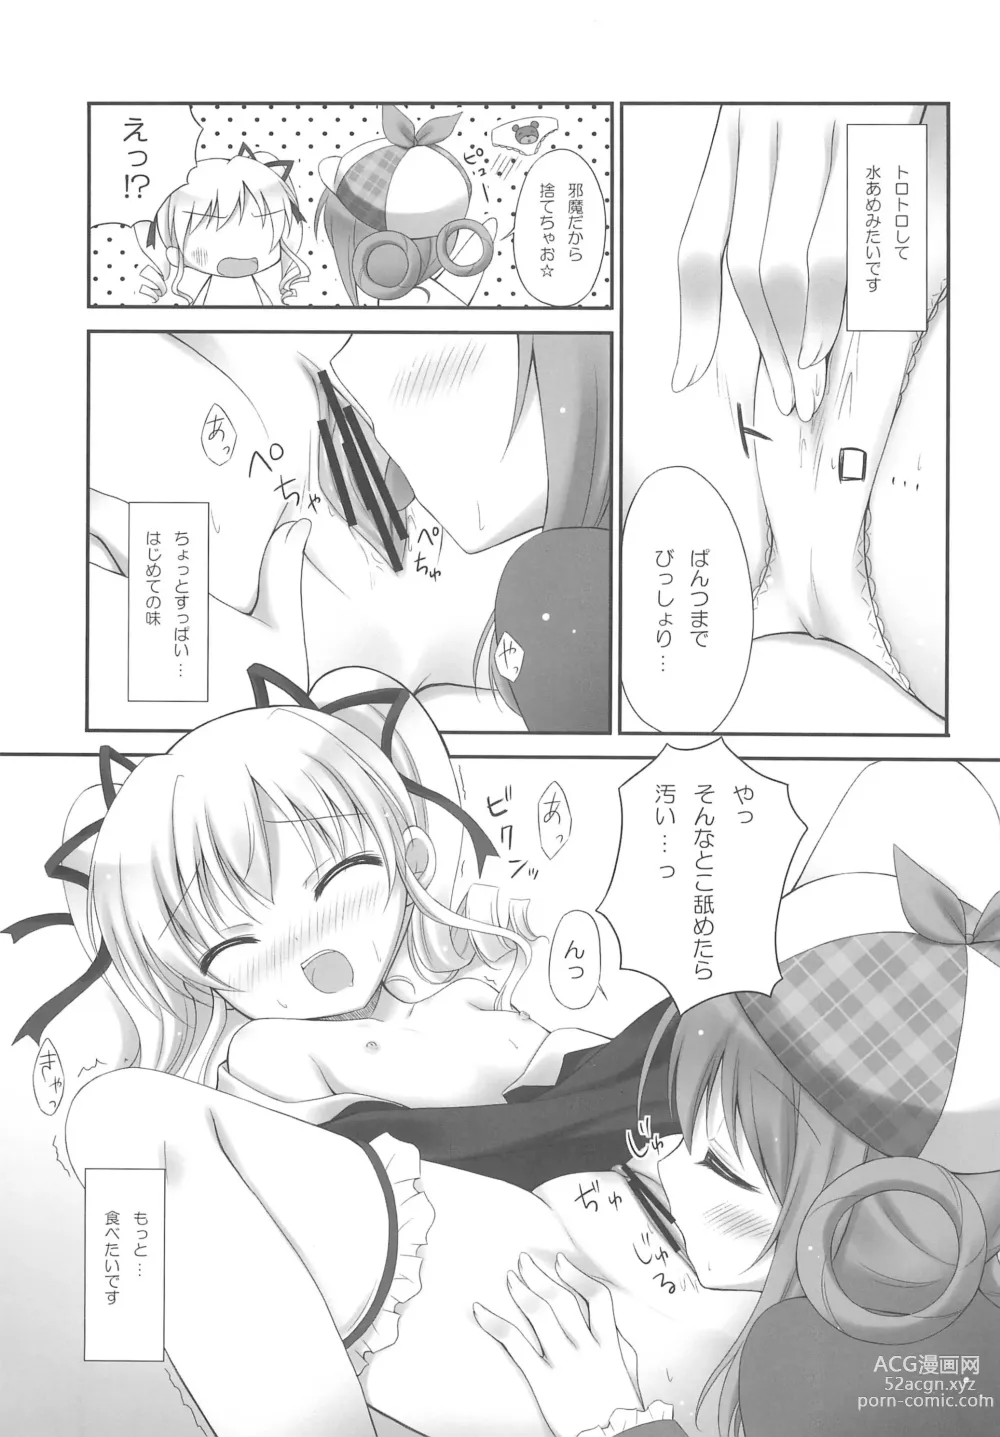 Page 9 of doujinshi Milky Time*